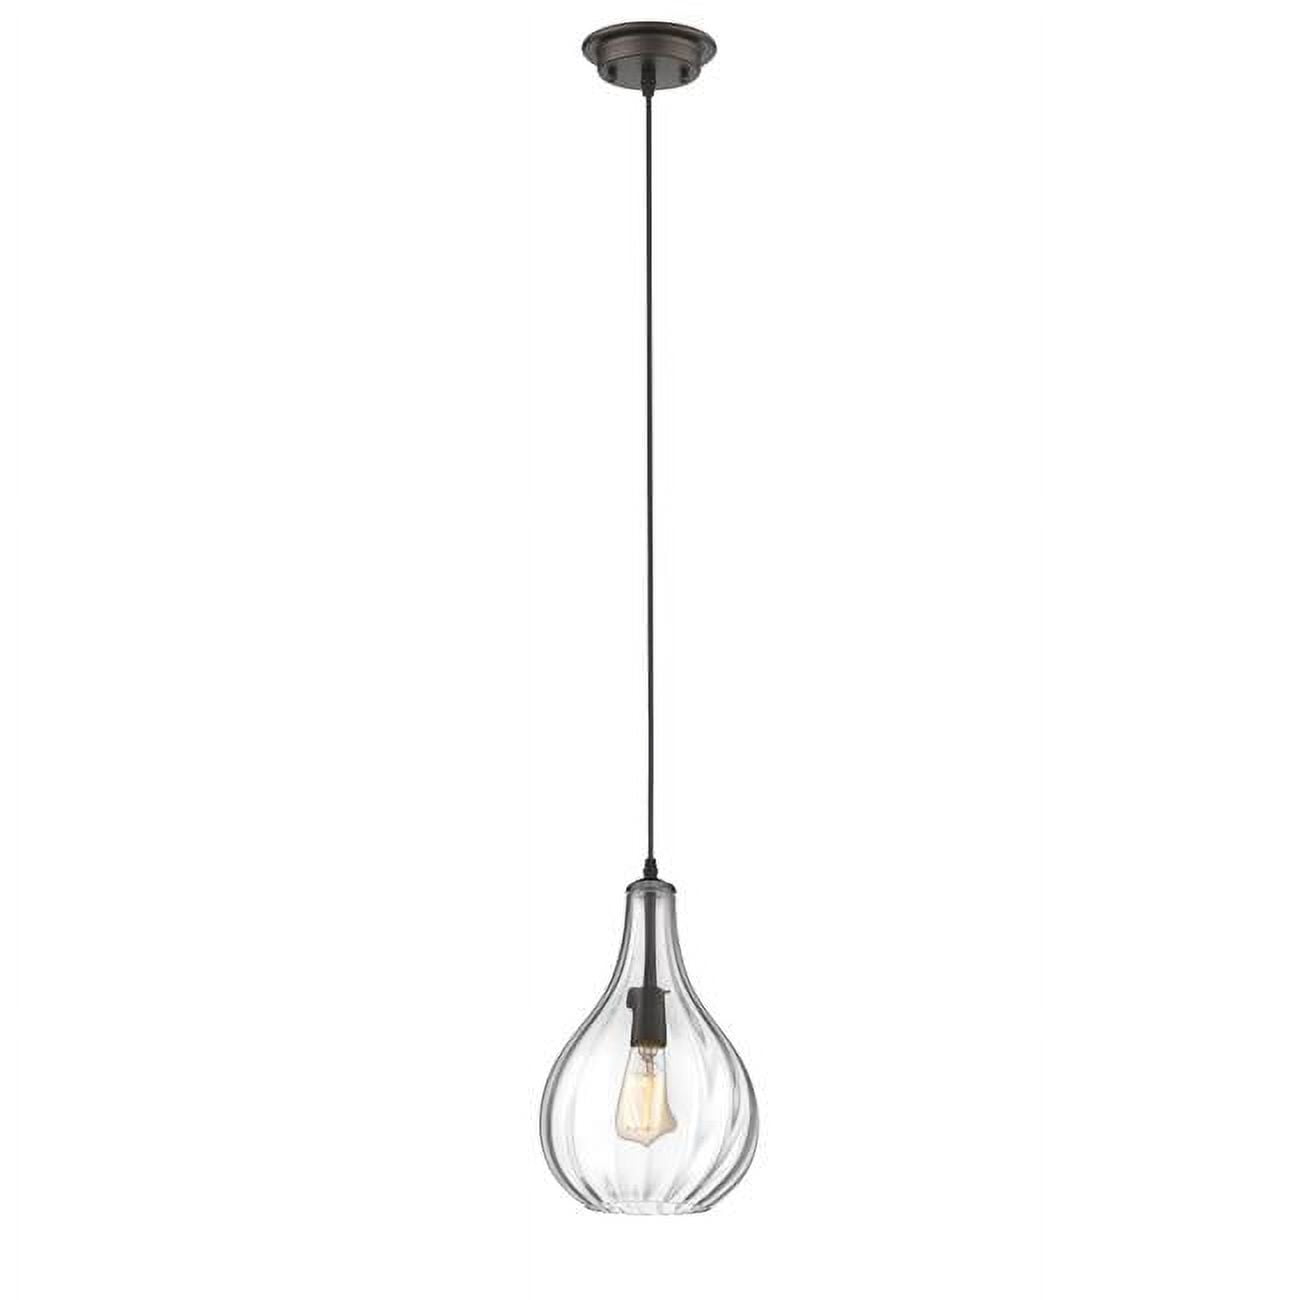 Ch2s107rb09-dp1 Savannah Transitional 1 Light Rubbed Bronze Ceiling Mini Pendant - 9 In.